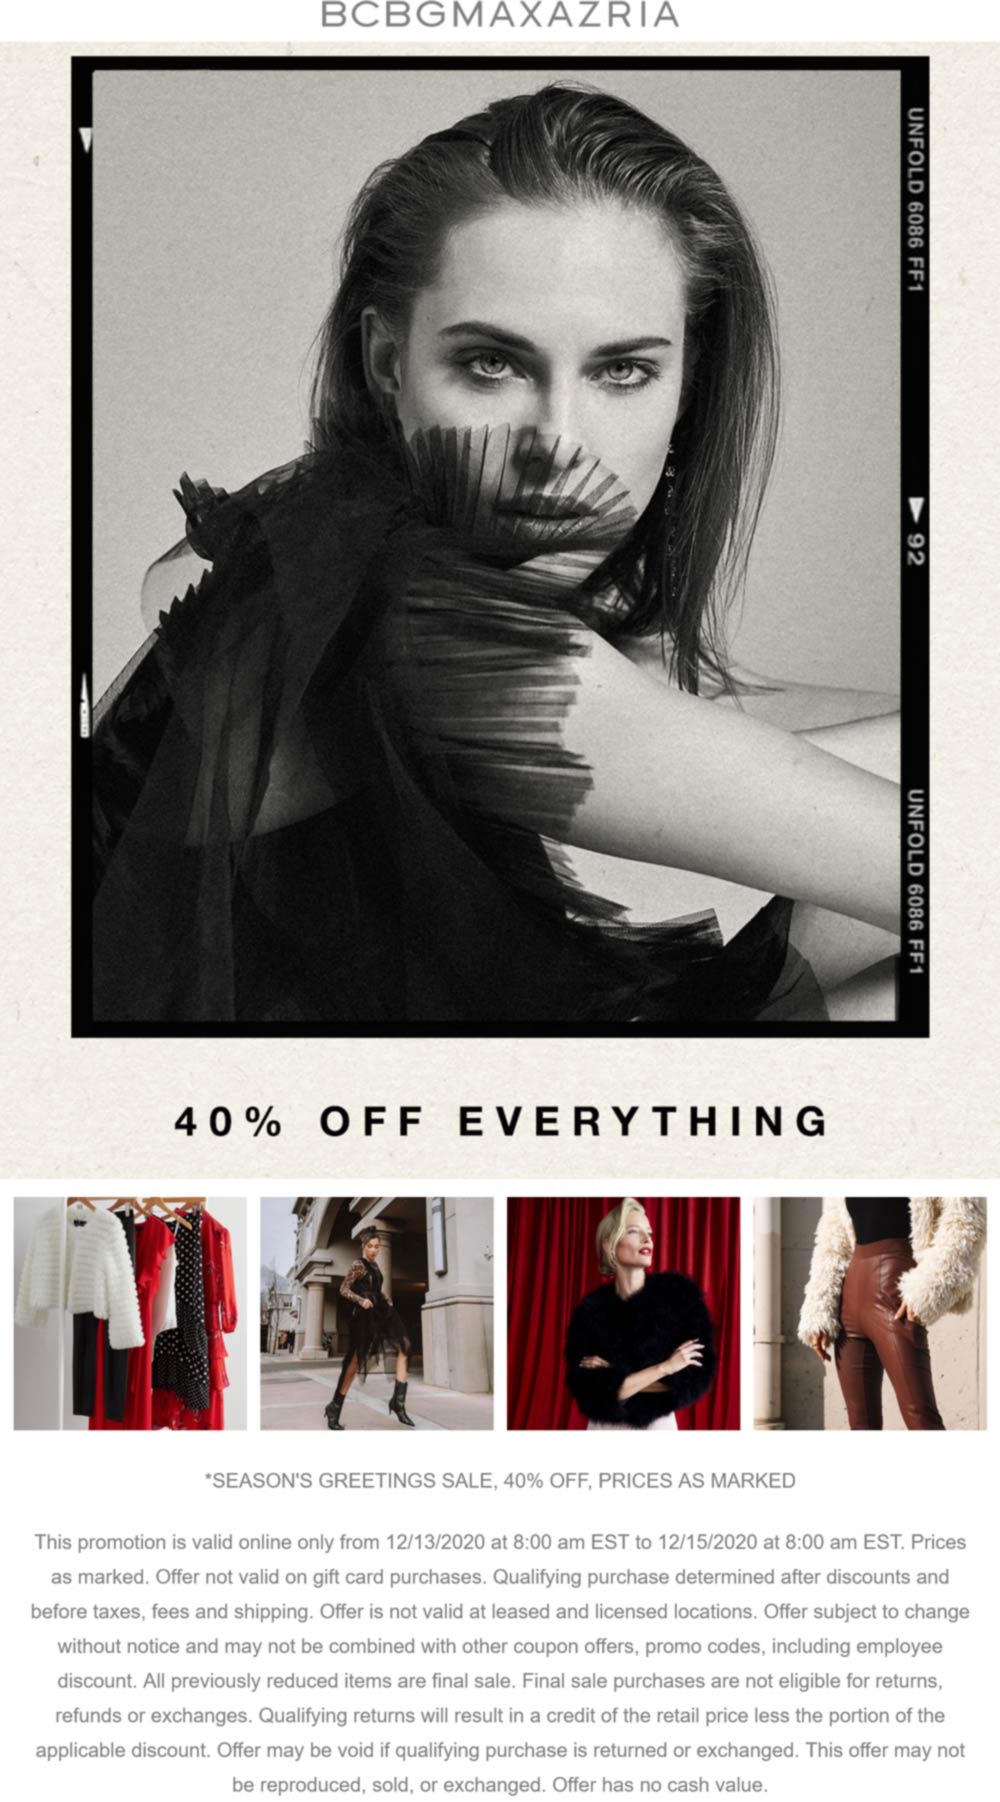 BCBGMAXAZRIA stores Coupon  40% off everything today at BCBGMAXAZRIA #bcbgmaxazria 